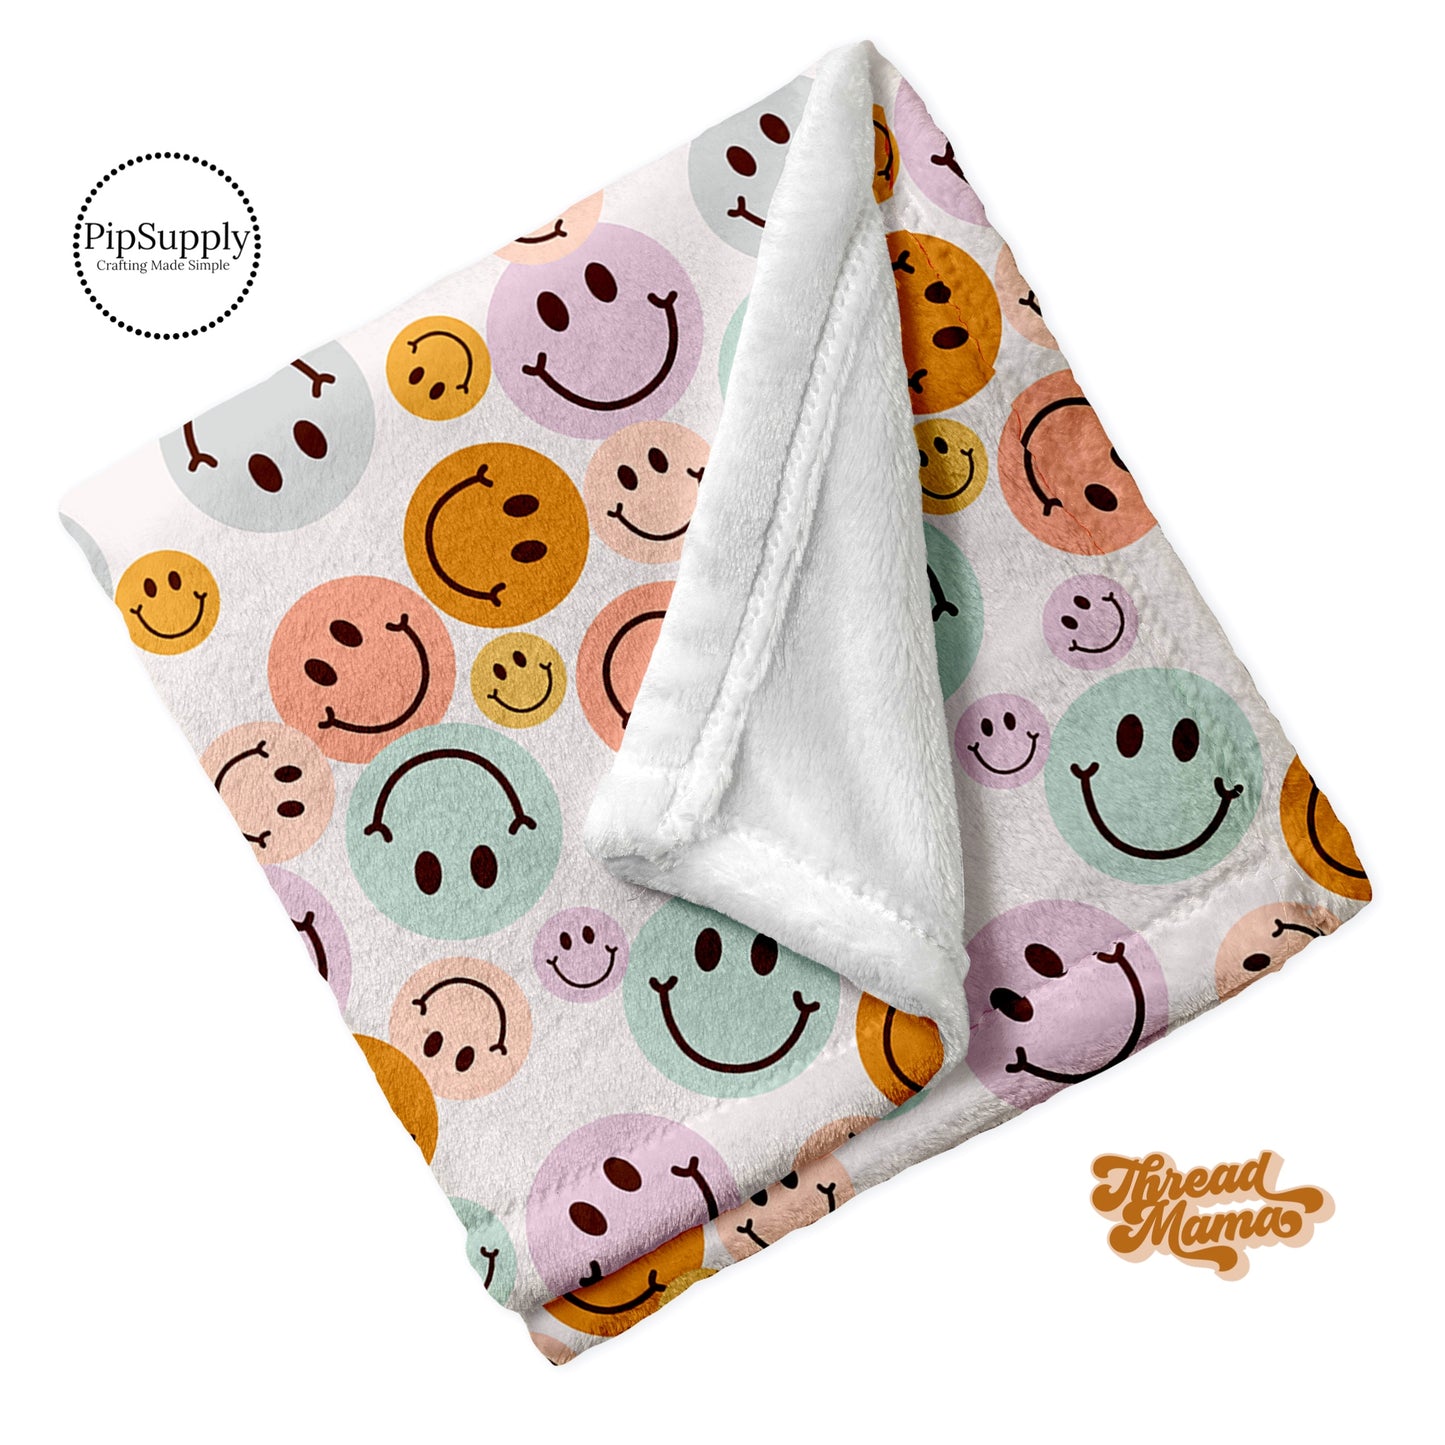 Happy Face Pastel Custom Printed Minky Blanket - Yellow, Aqua, Lavender and Peach Smiley Faces Blanket